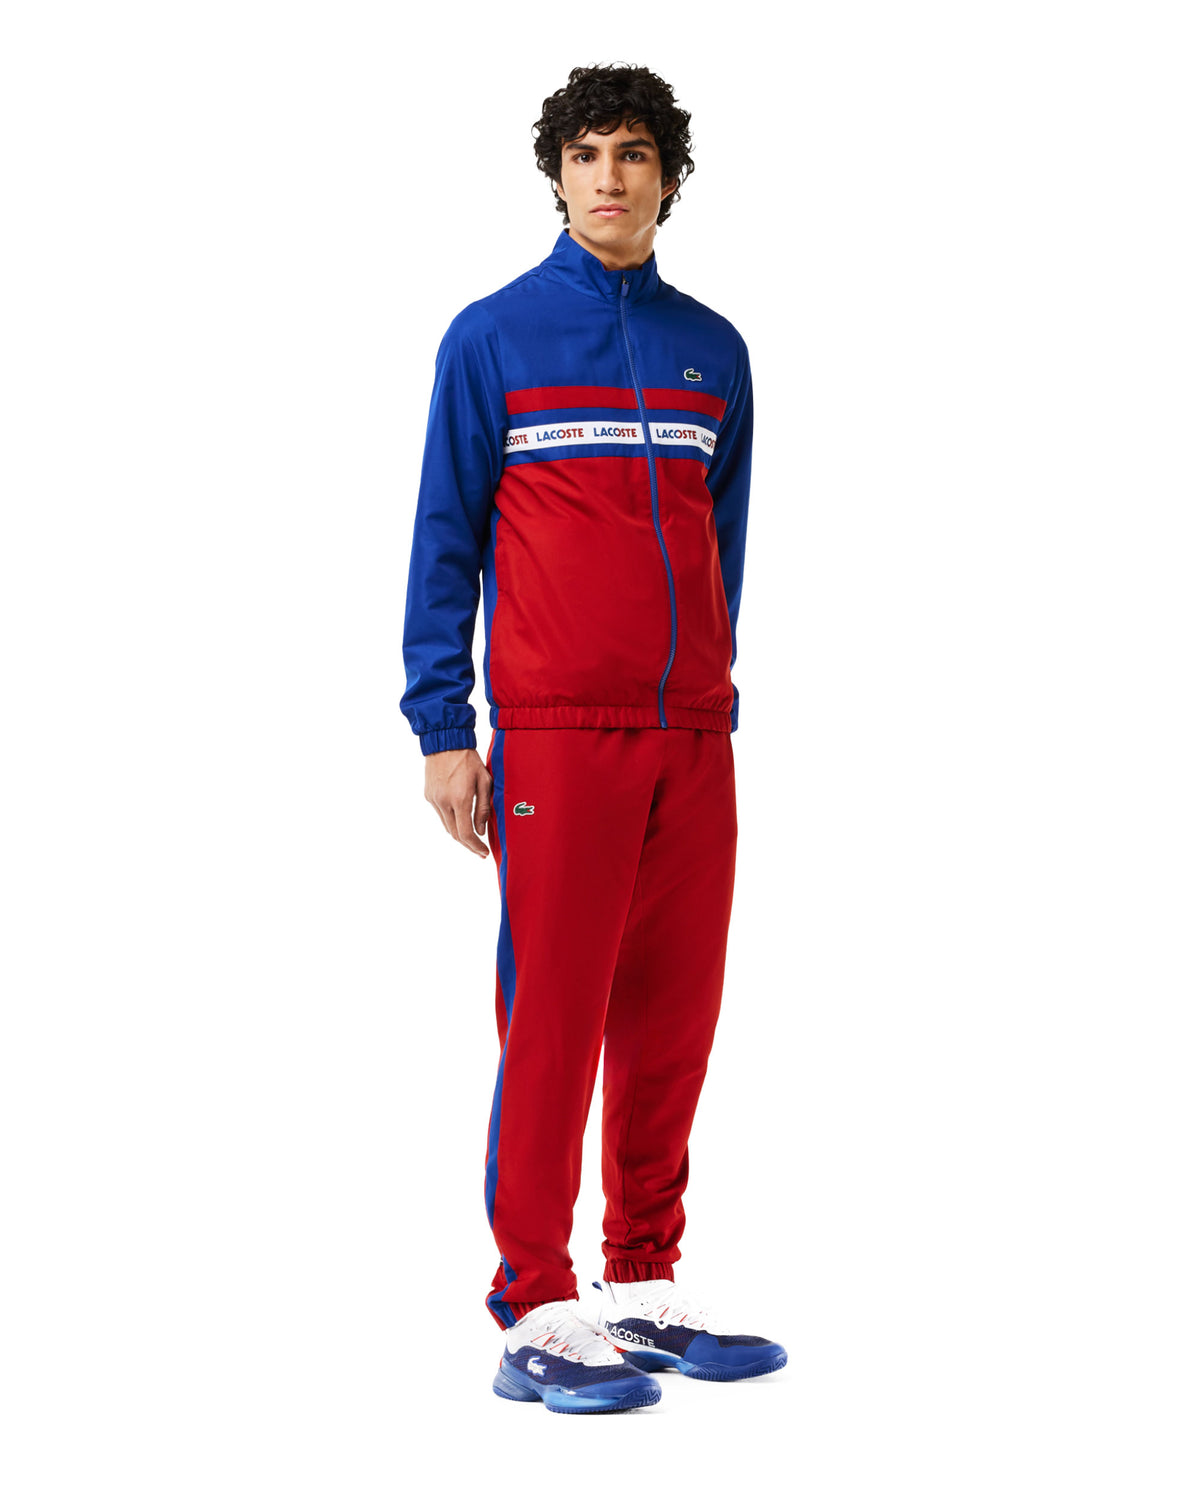 Man Suit Lacoste Red Royal